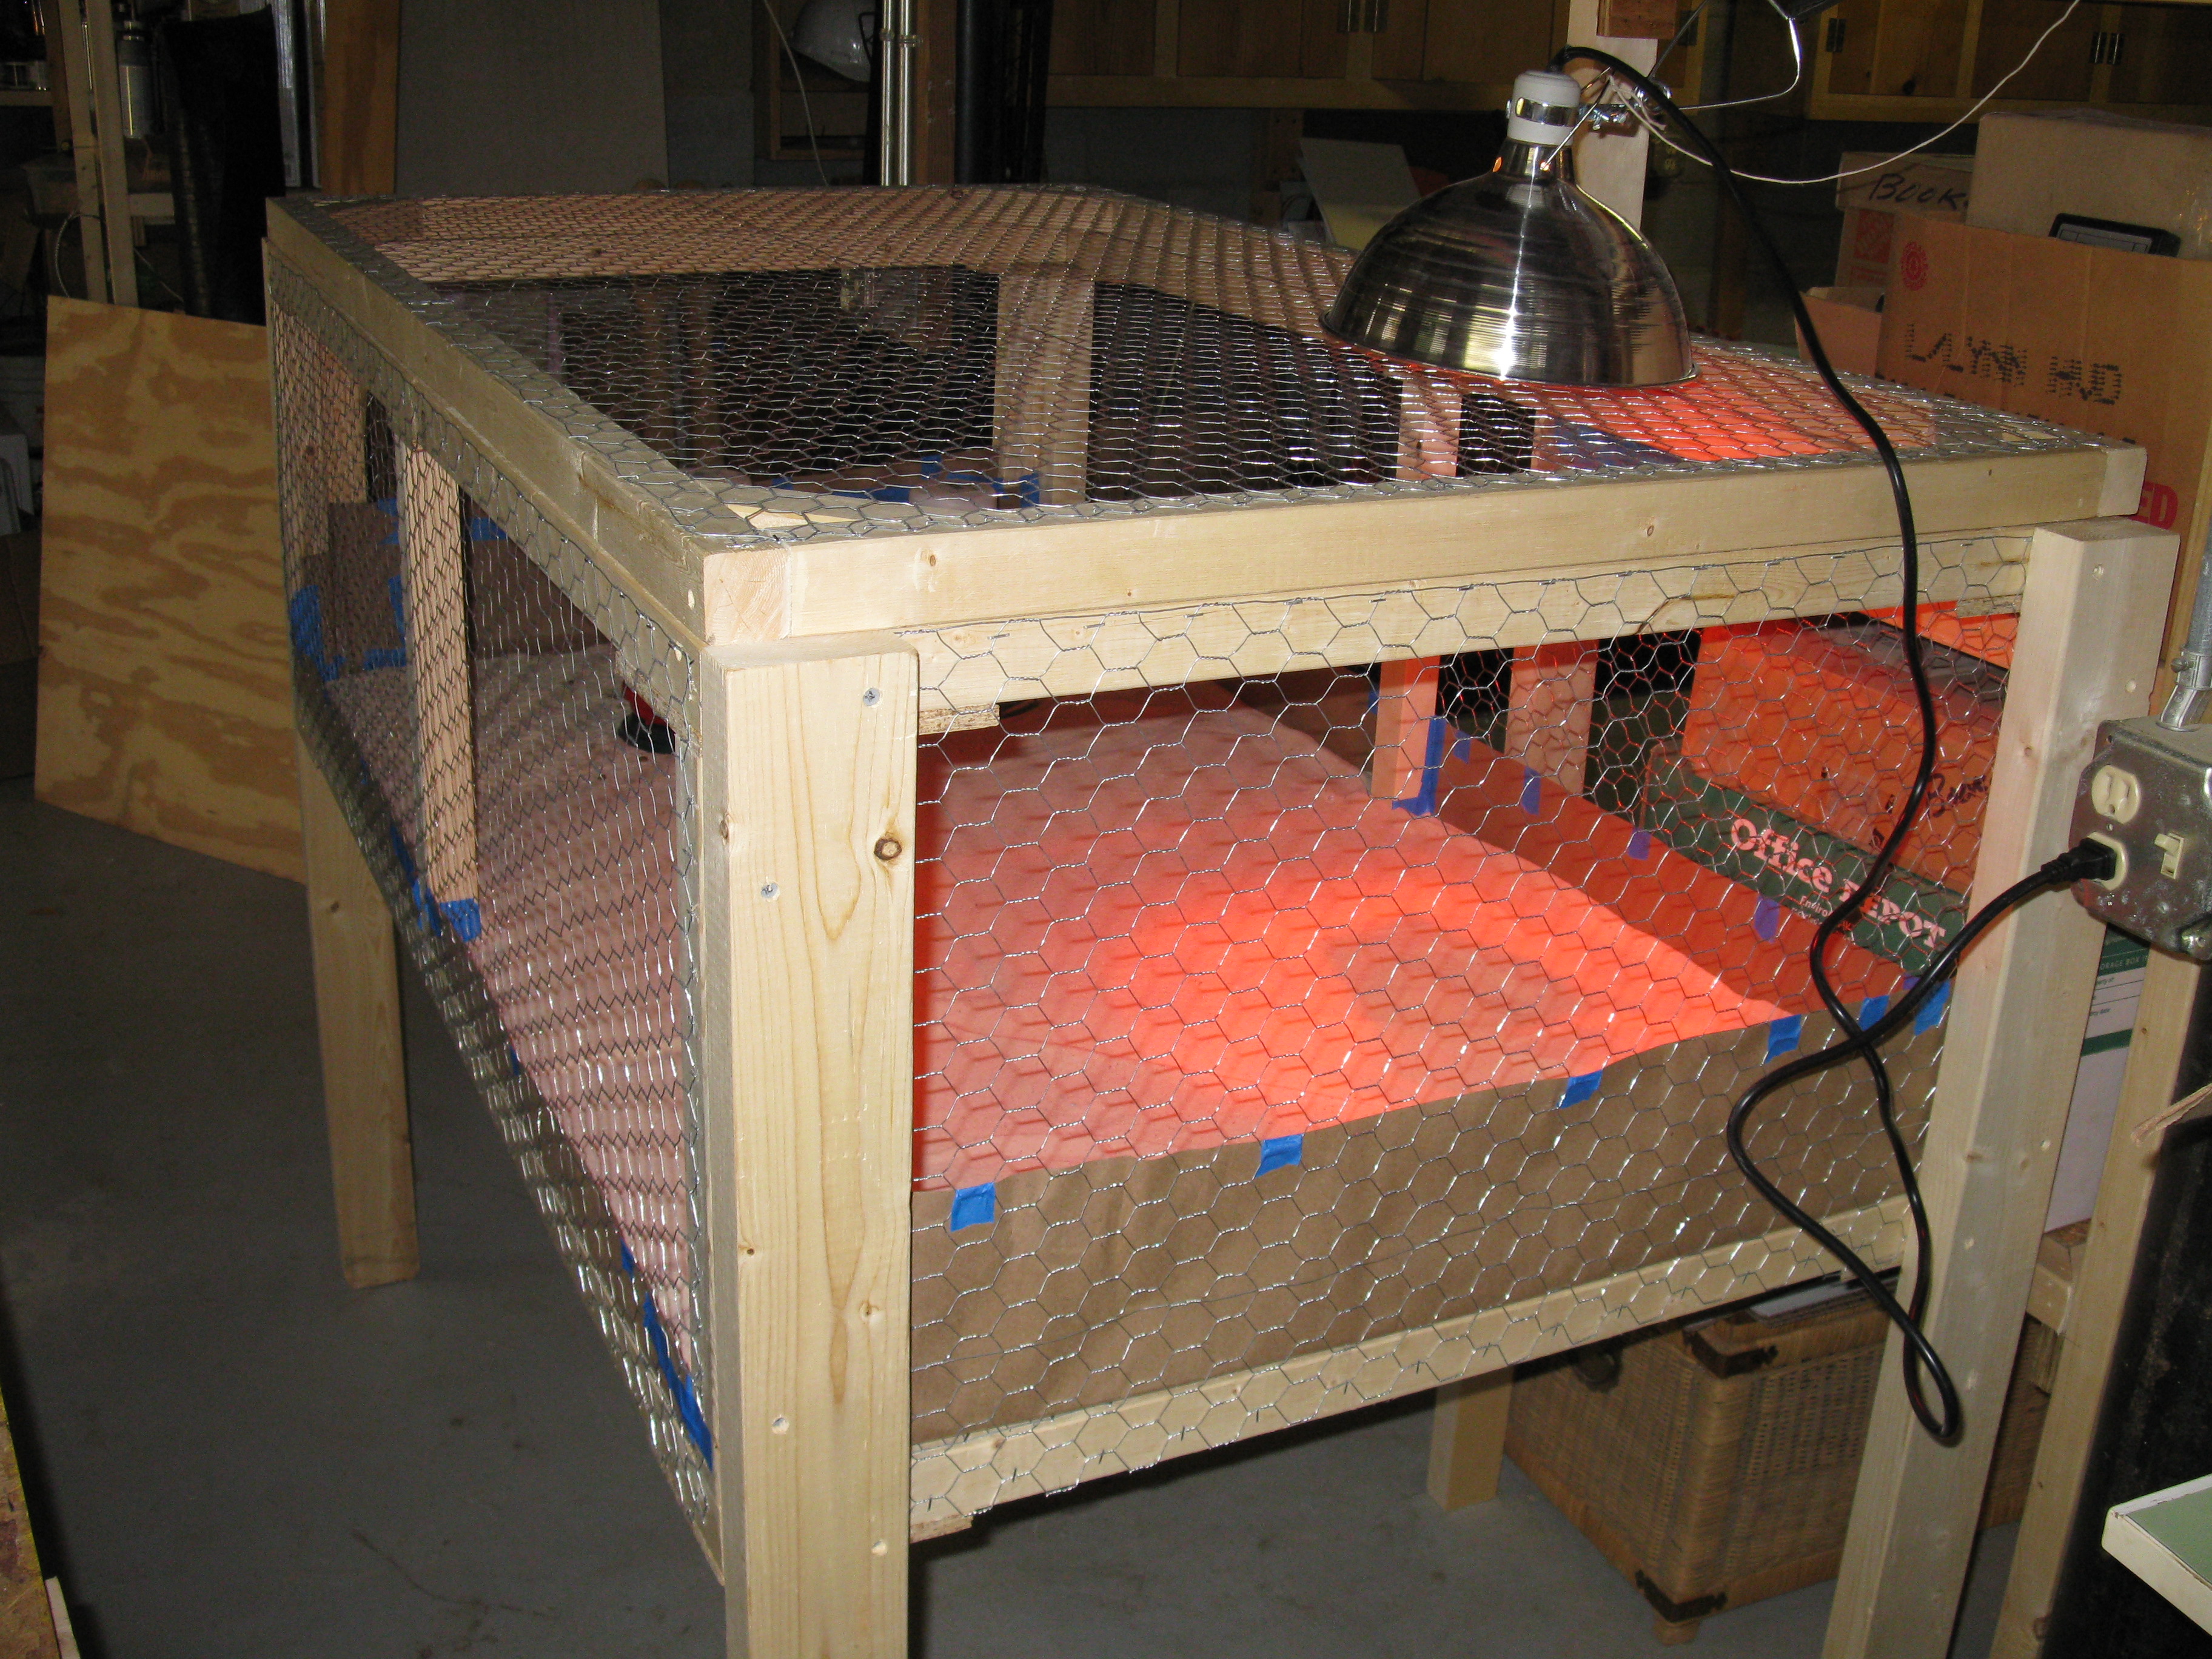 The brooder pen is constructed from 2x2s and 2x4s with 1/2" hardware cloth on the bottom and 1" chicken wire for the sides and top.  The whole top is hinged.  I would make the top in two halfs next time for easier access.  I used rosin paper on the floor with about 1" of sand on top of that. Sand was cheap and easy to clean.